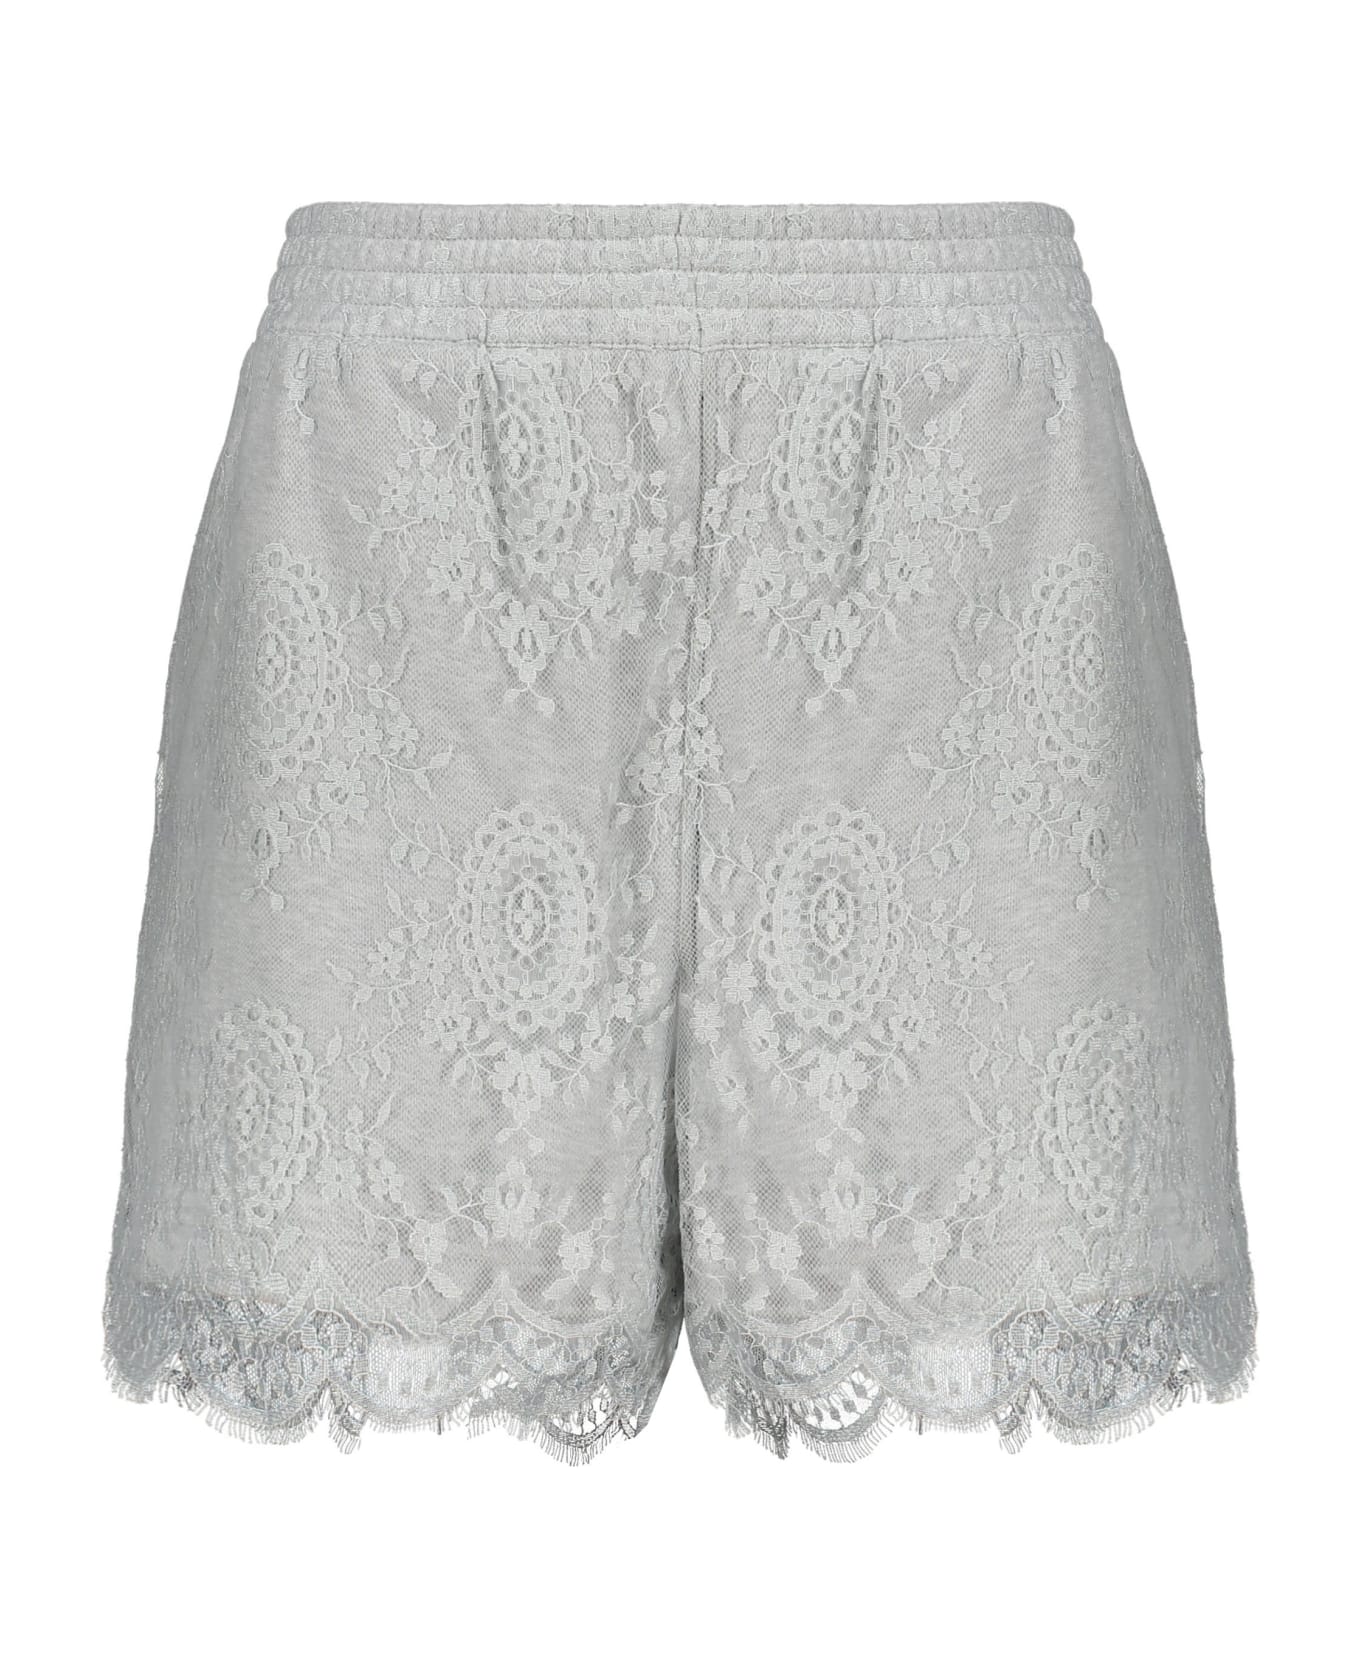 Burberry Lace Shorts - grey